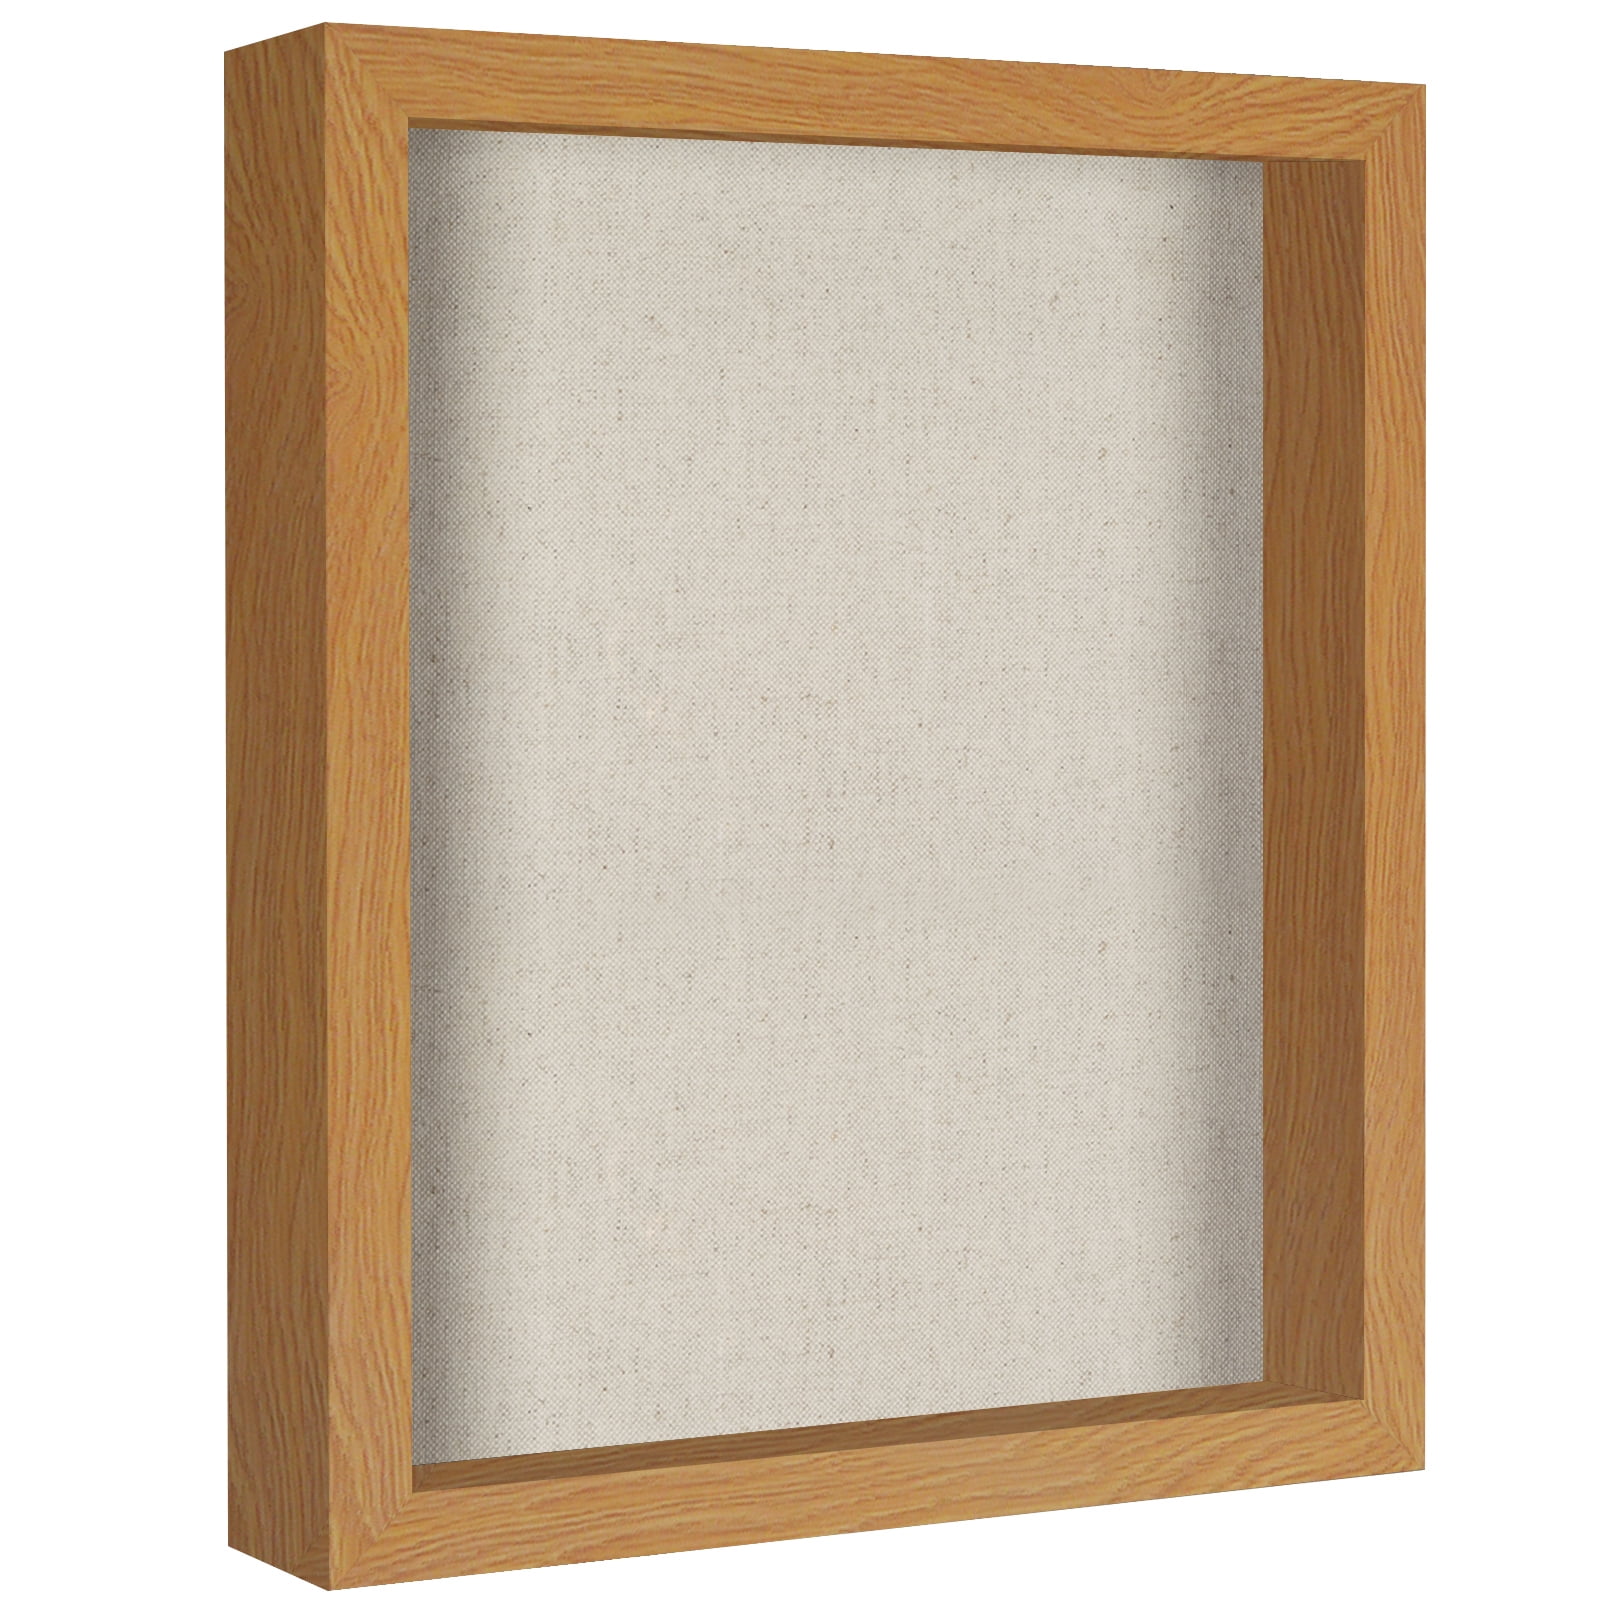 Americanflat 11x14 Inches Picture Frame With 8x10 Inches Mat - Composite  Wood With Glass Cover - White : Target